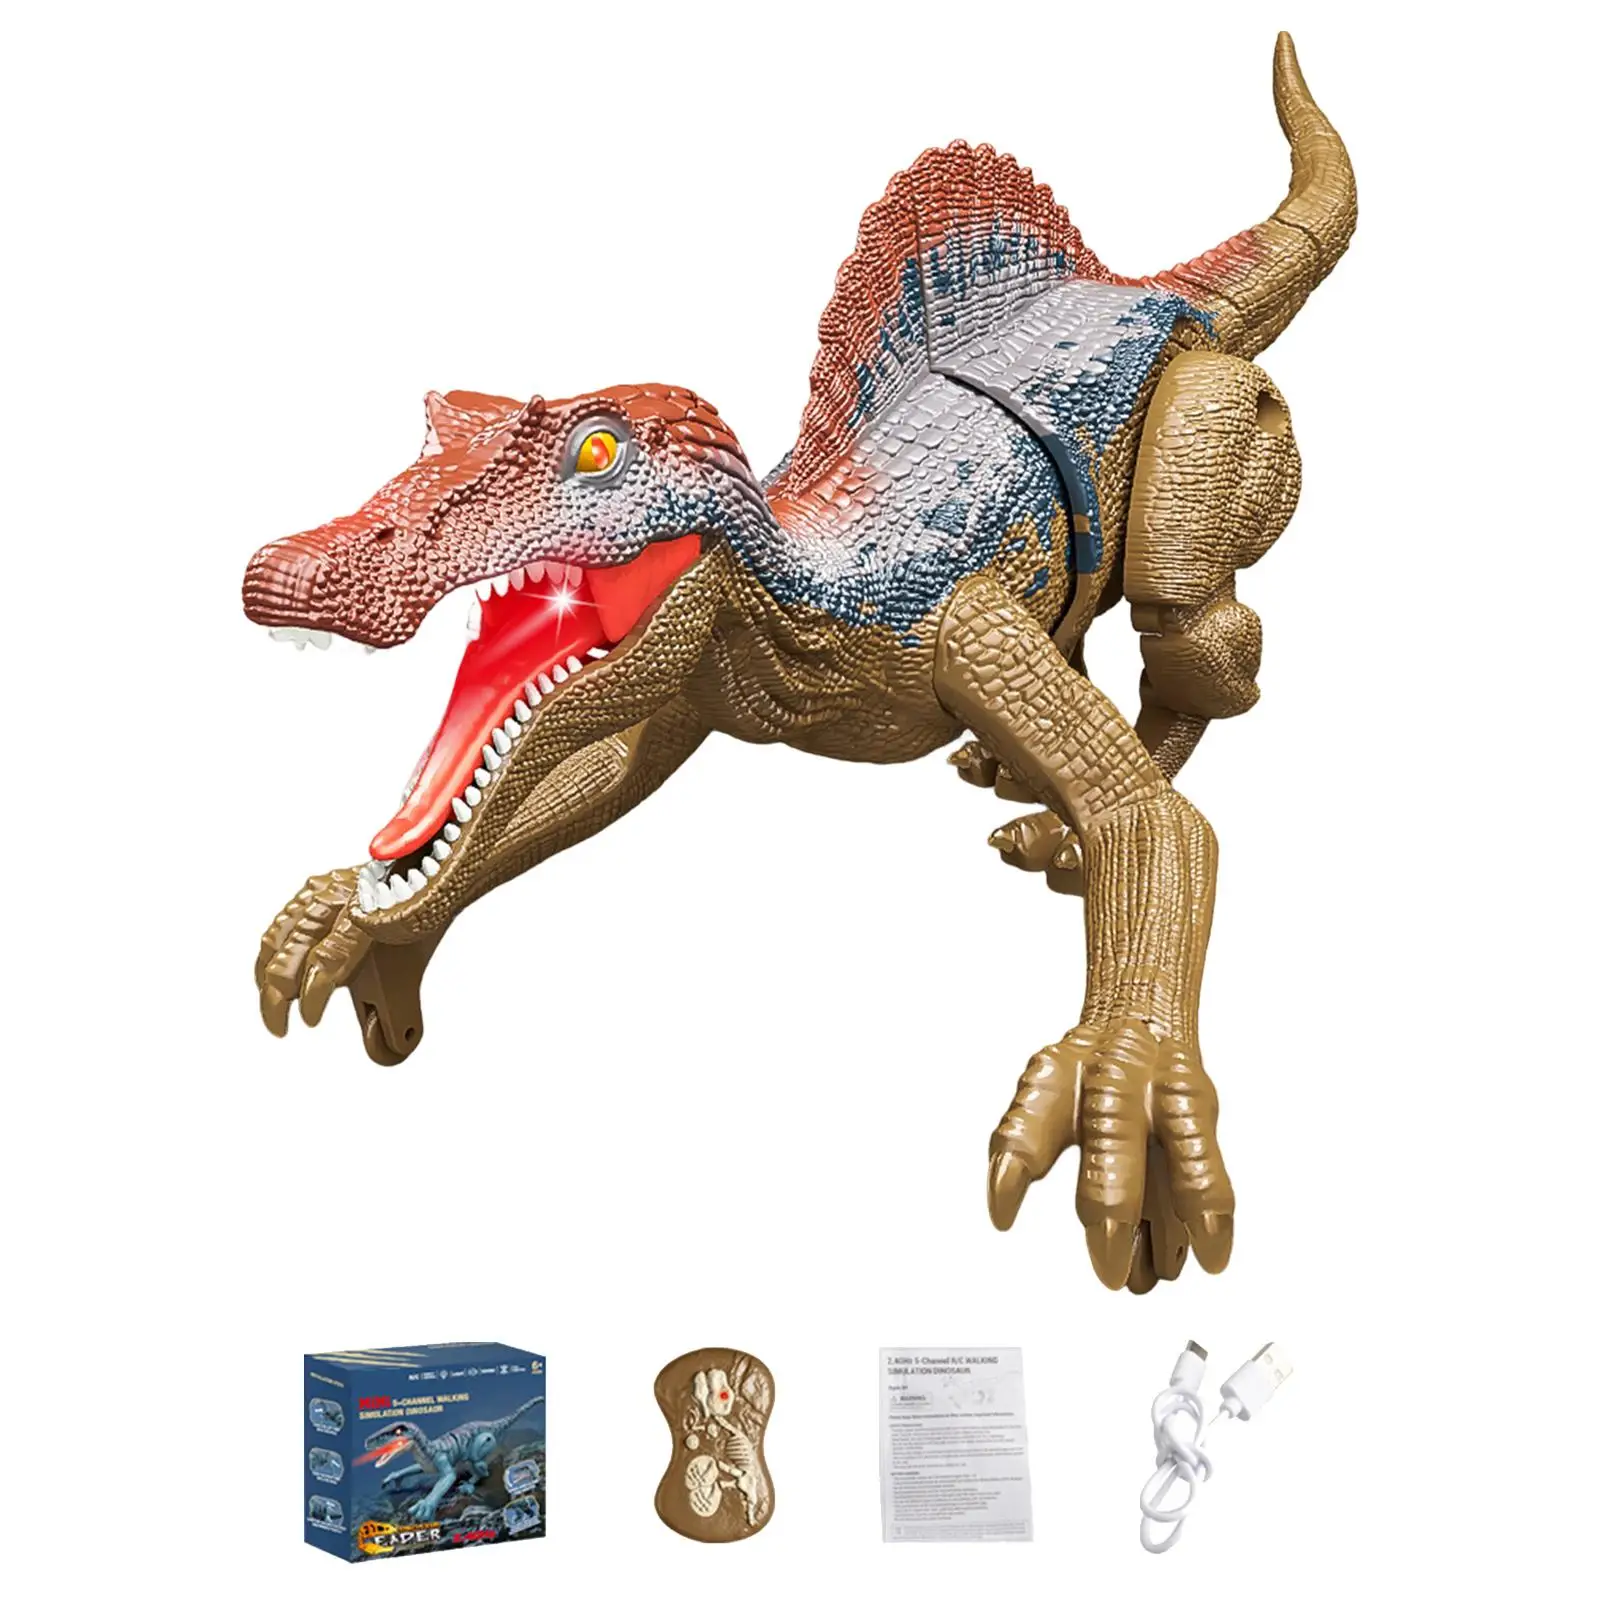 Robot Dinosaur Interactive Toy Realistic Walking Dinosaur Toys Remote Controlled Dinosaur for Girls Toddlers Boys Holiday Gifts